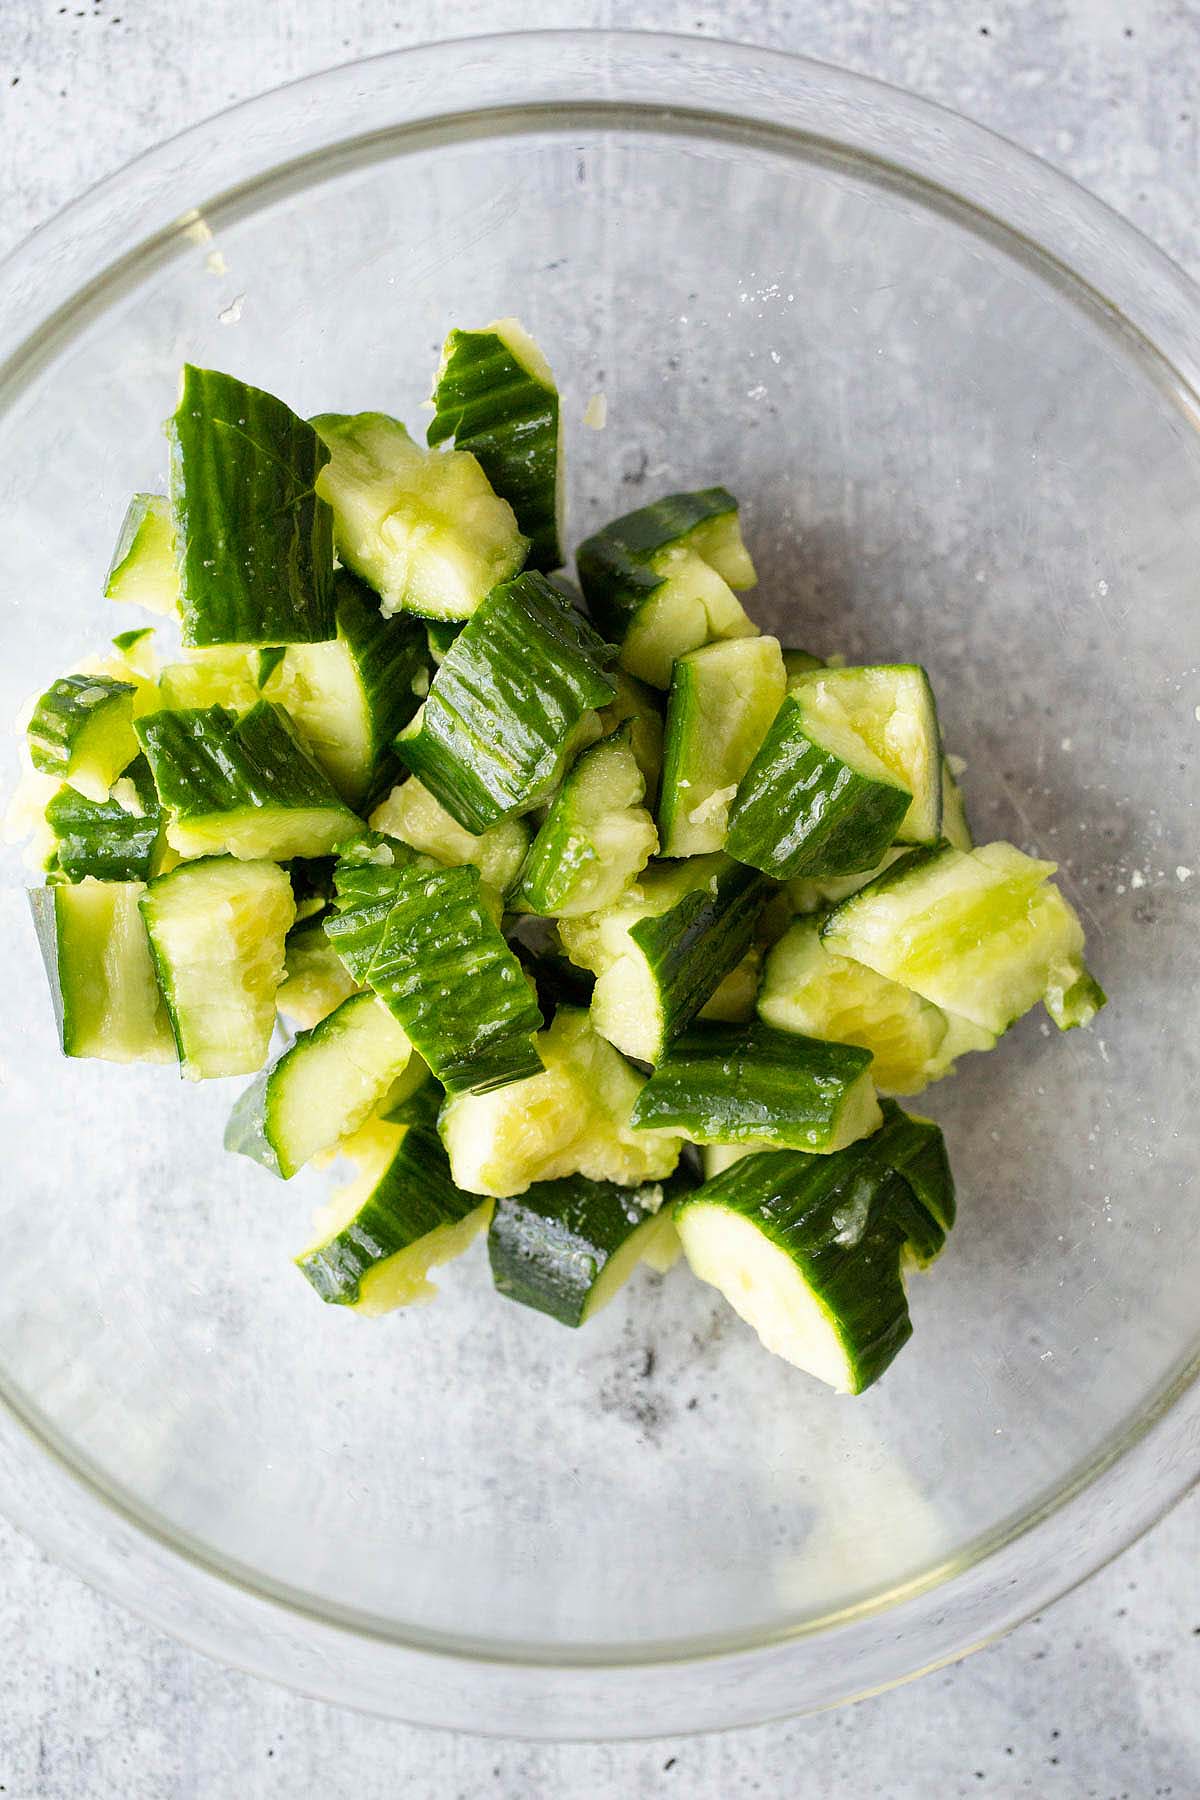 smashed cucumber in a bowl.